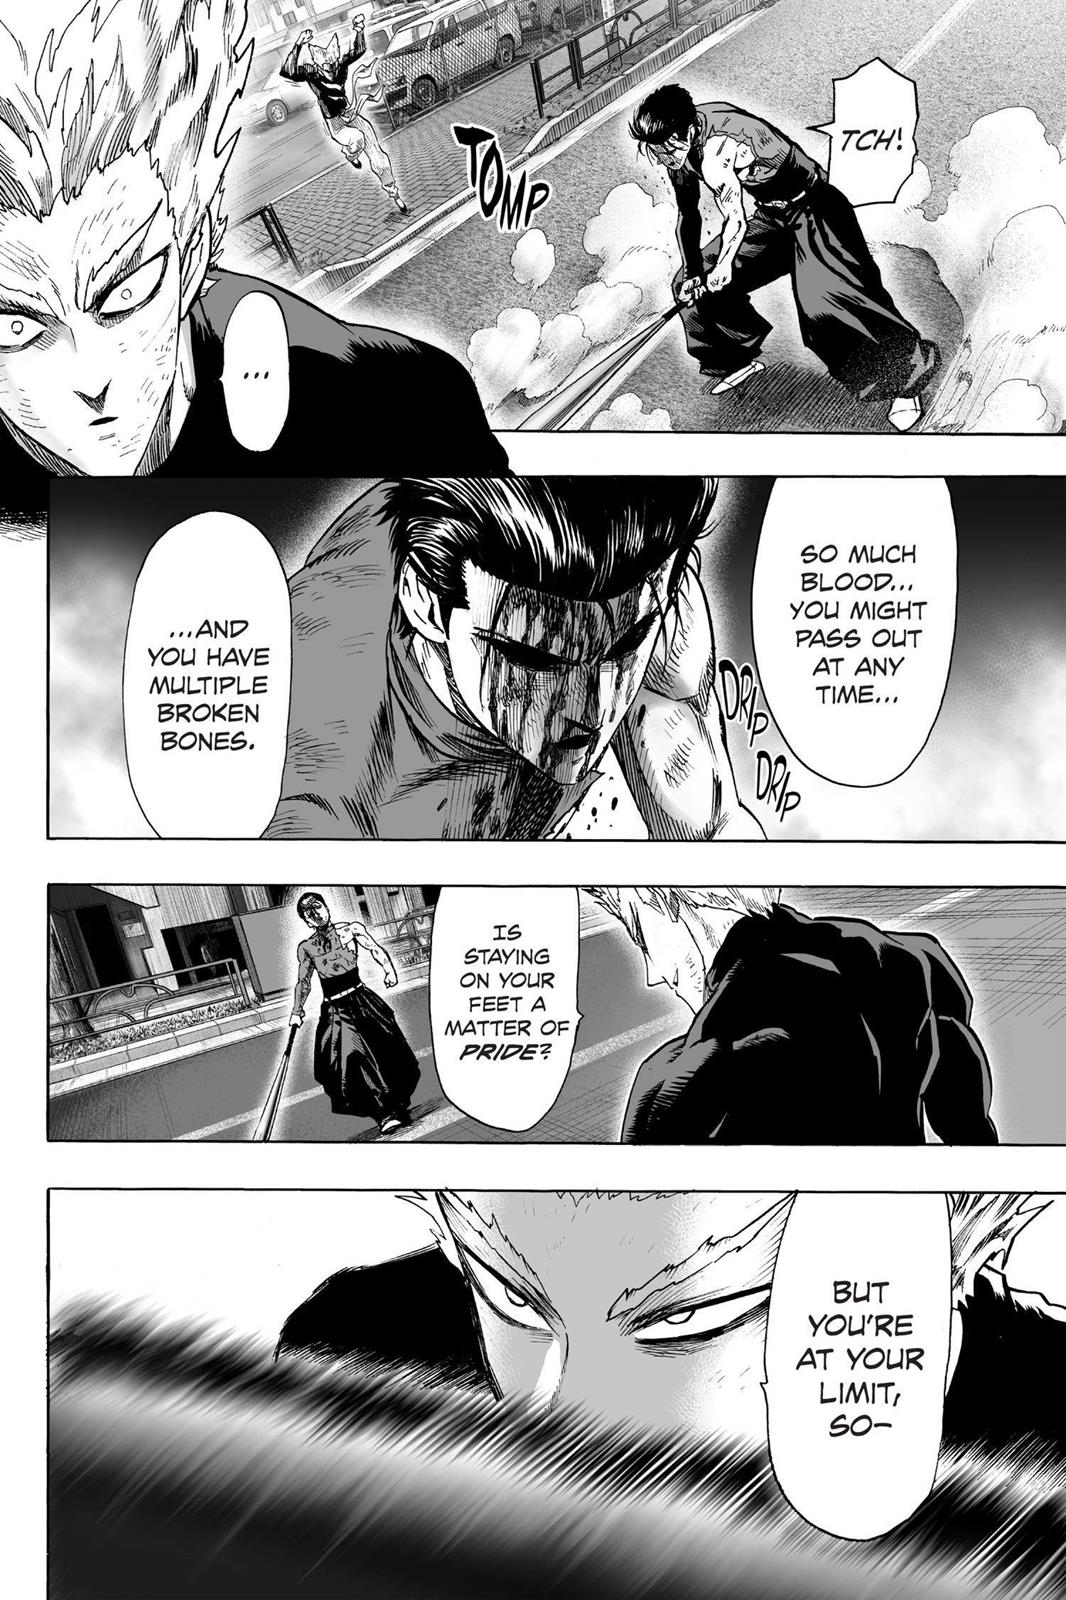 One-Punch Man, Punch 58 image 17